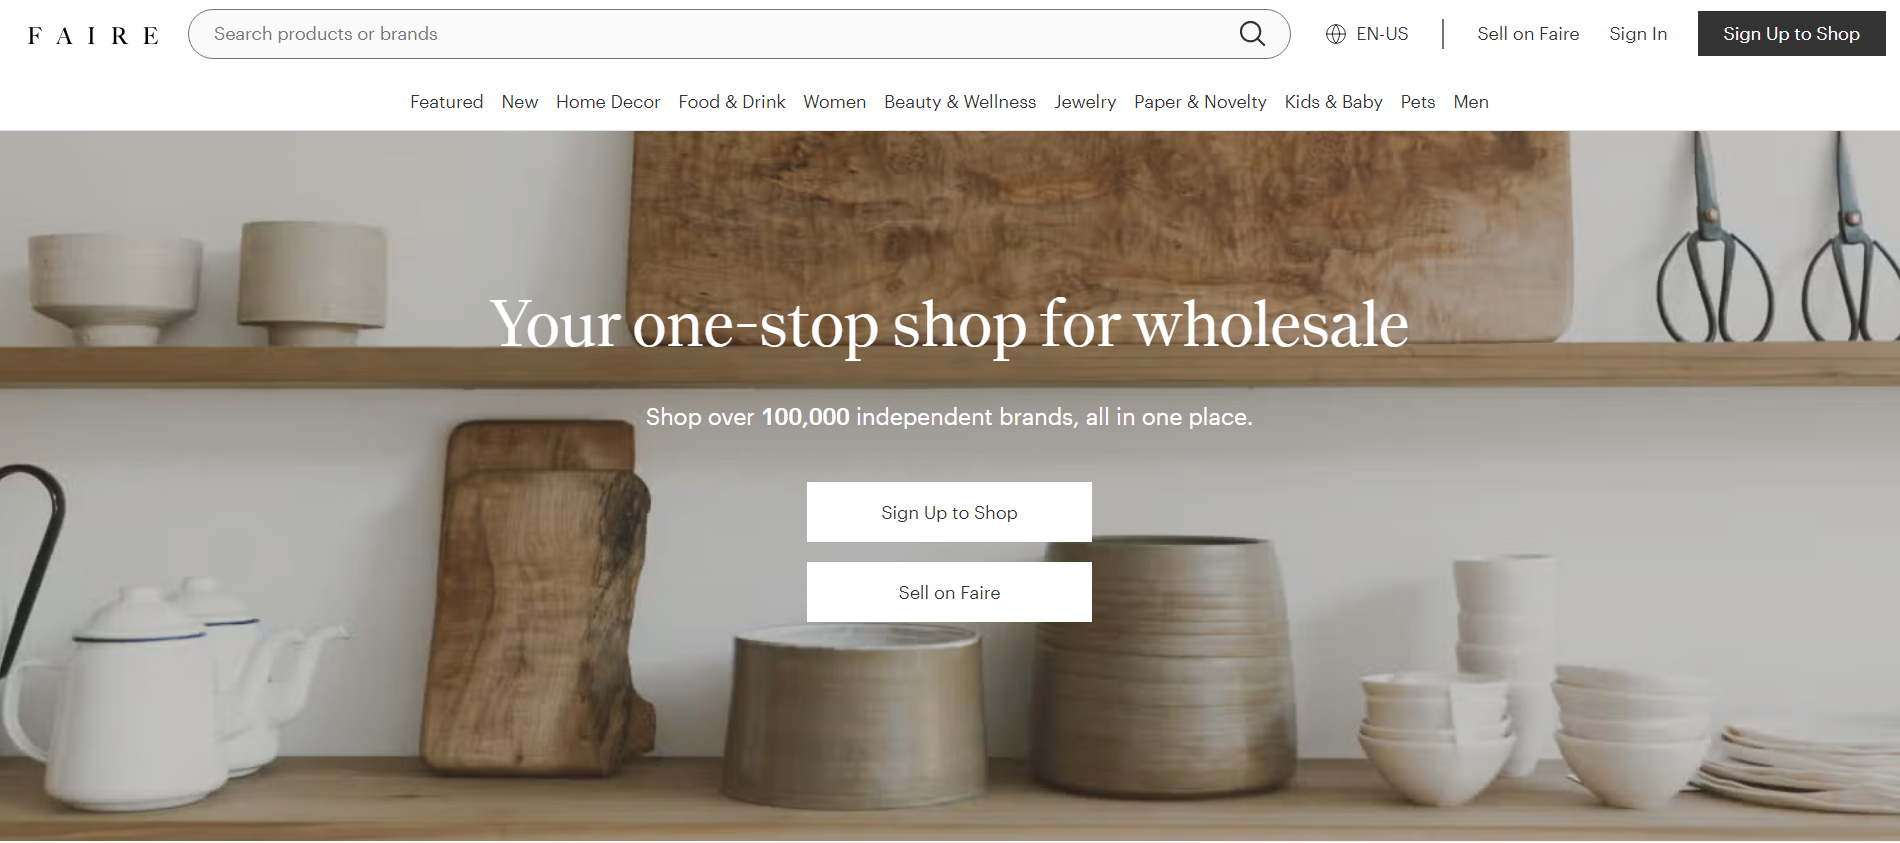 homepage of a wholesale clothing marketplace - Faire